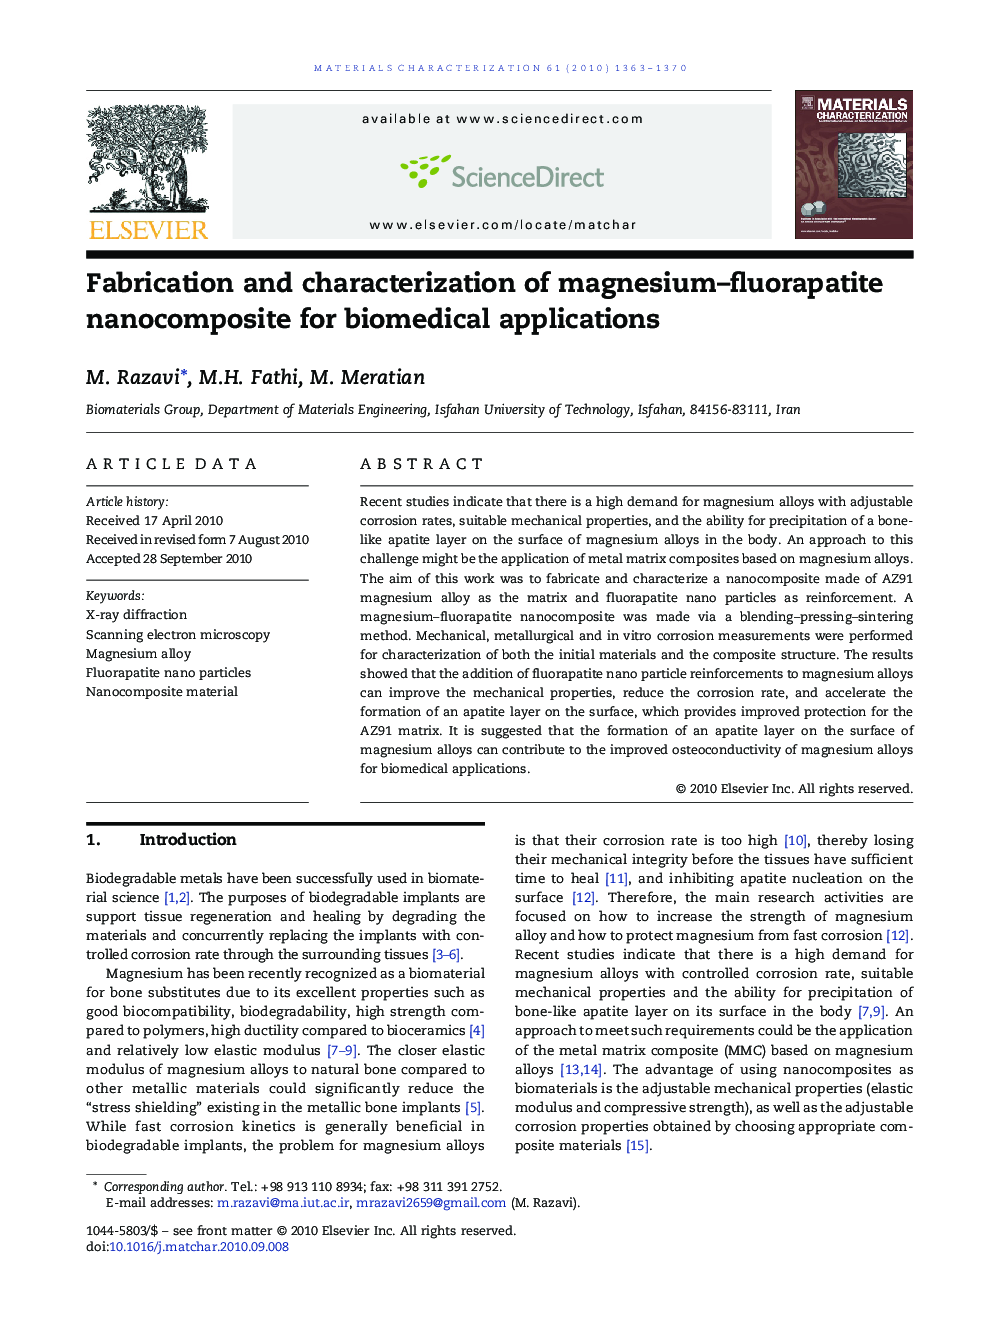 Fabrication and characterization of magnesium–fluorapatite nanocomposite for biomedical applications